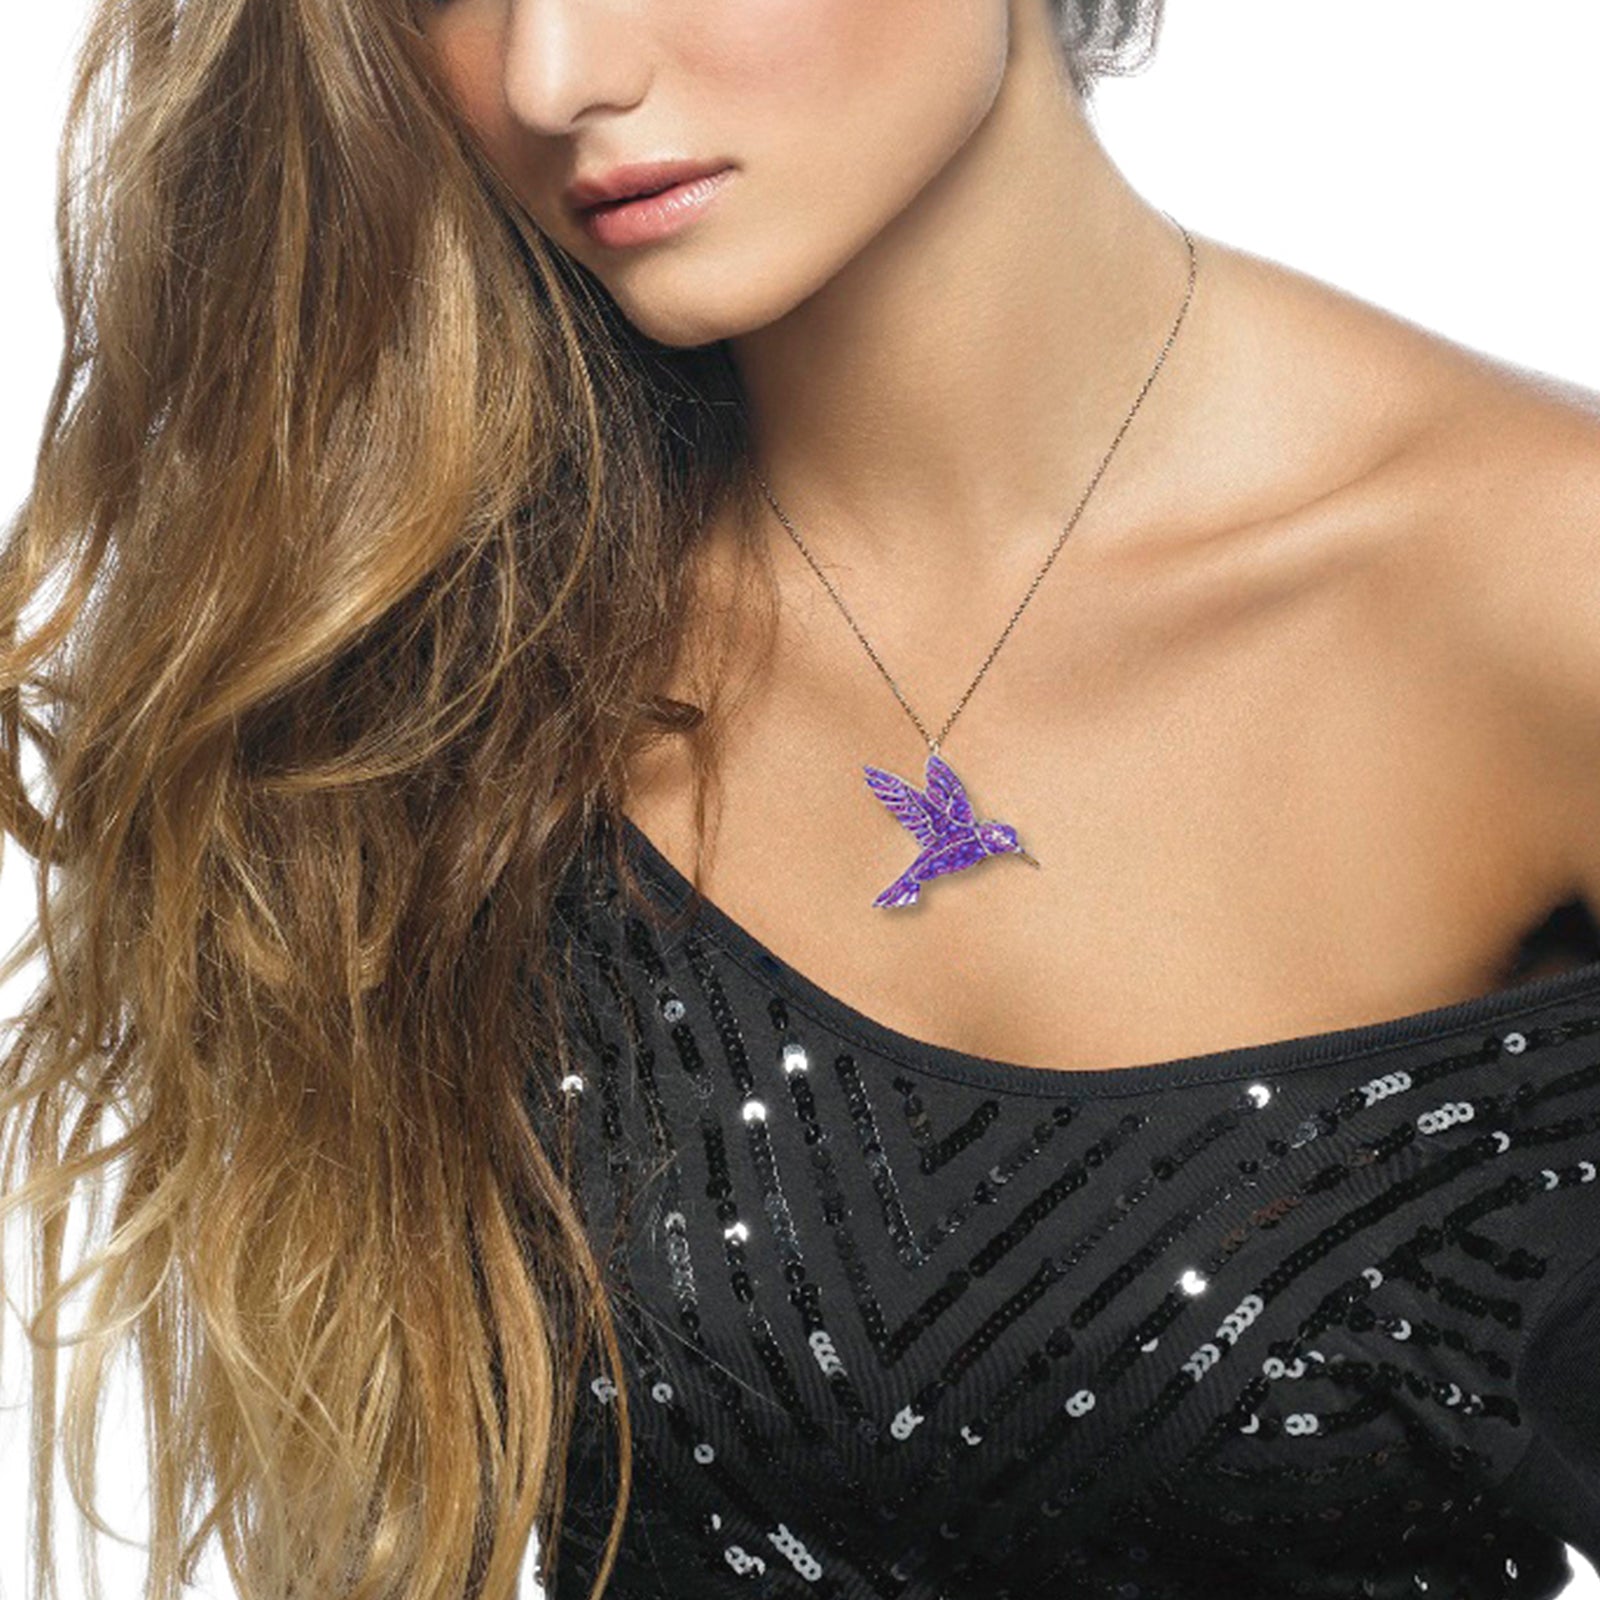 A woman wearing a sequined black top and a Gold Plated Sterling Silver Hummingbird Necklace Pendant, showing her shoulder and long, wavy hair.